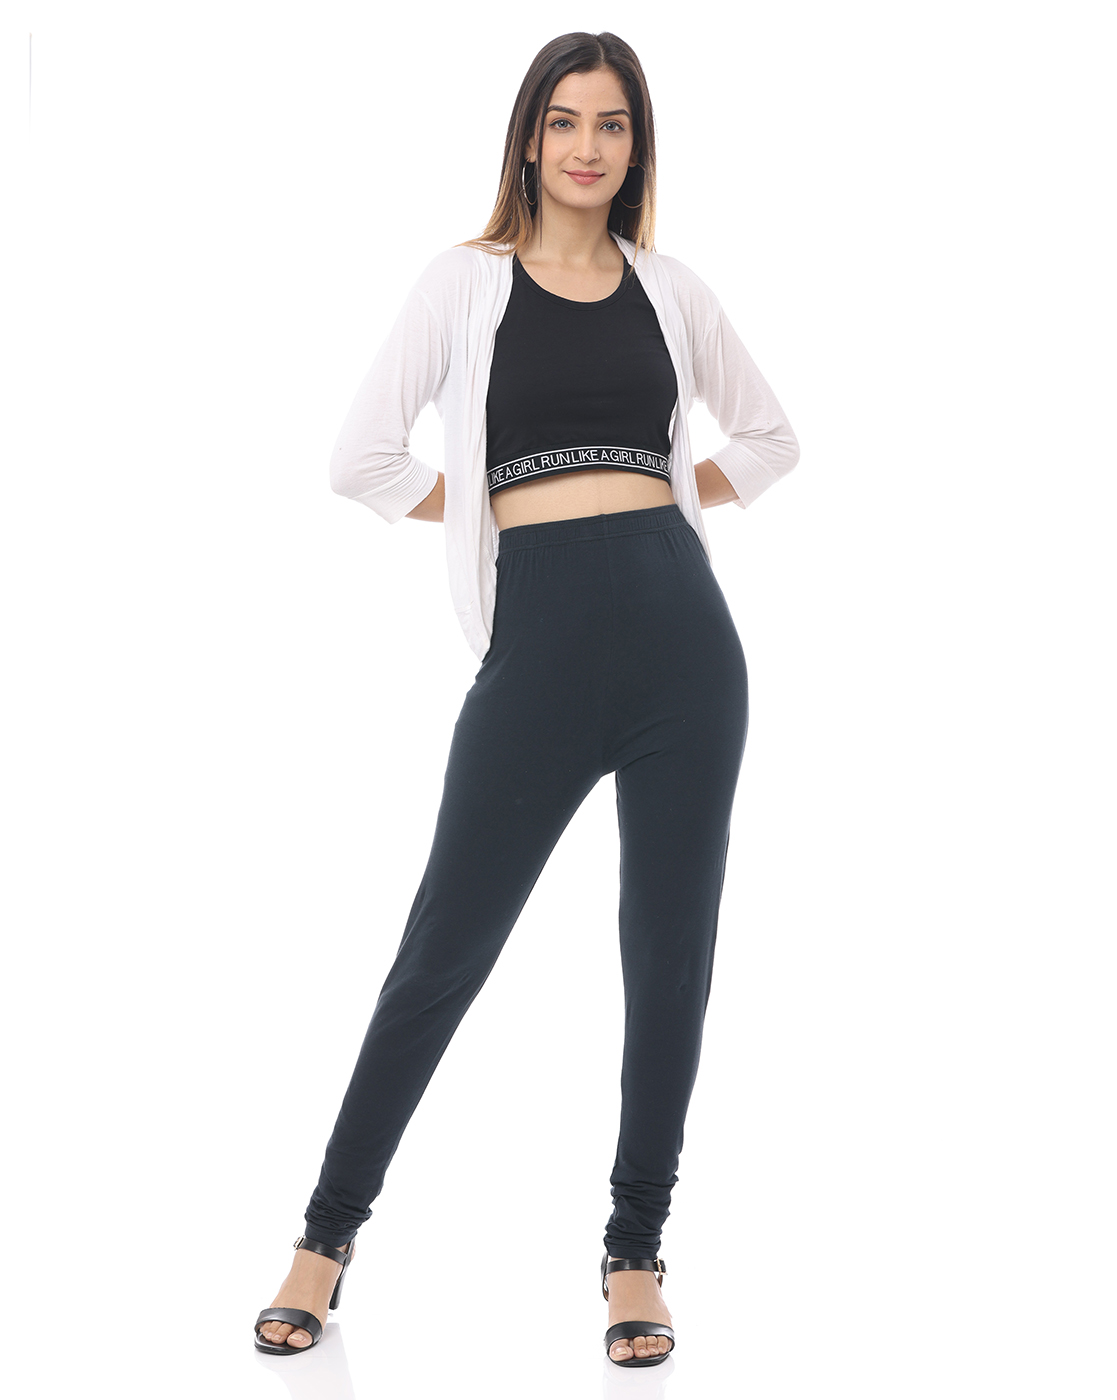 Crepeon Leggings Ankle Length exporter and supplier from India